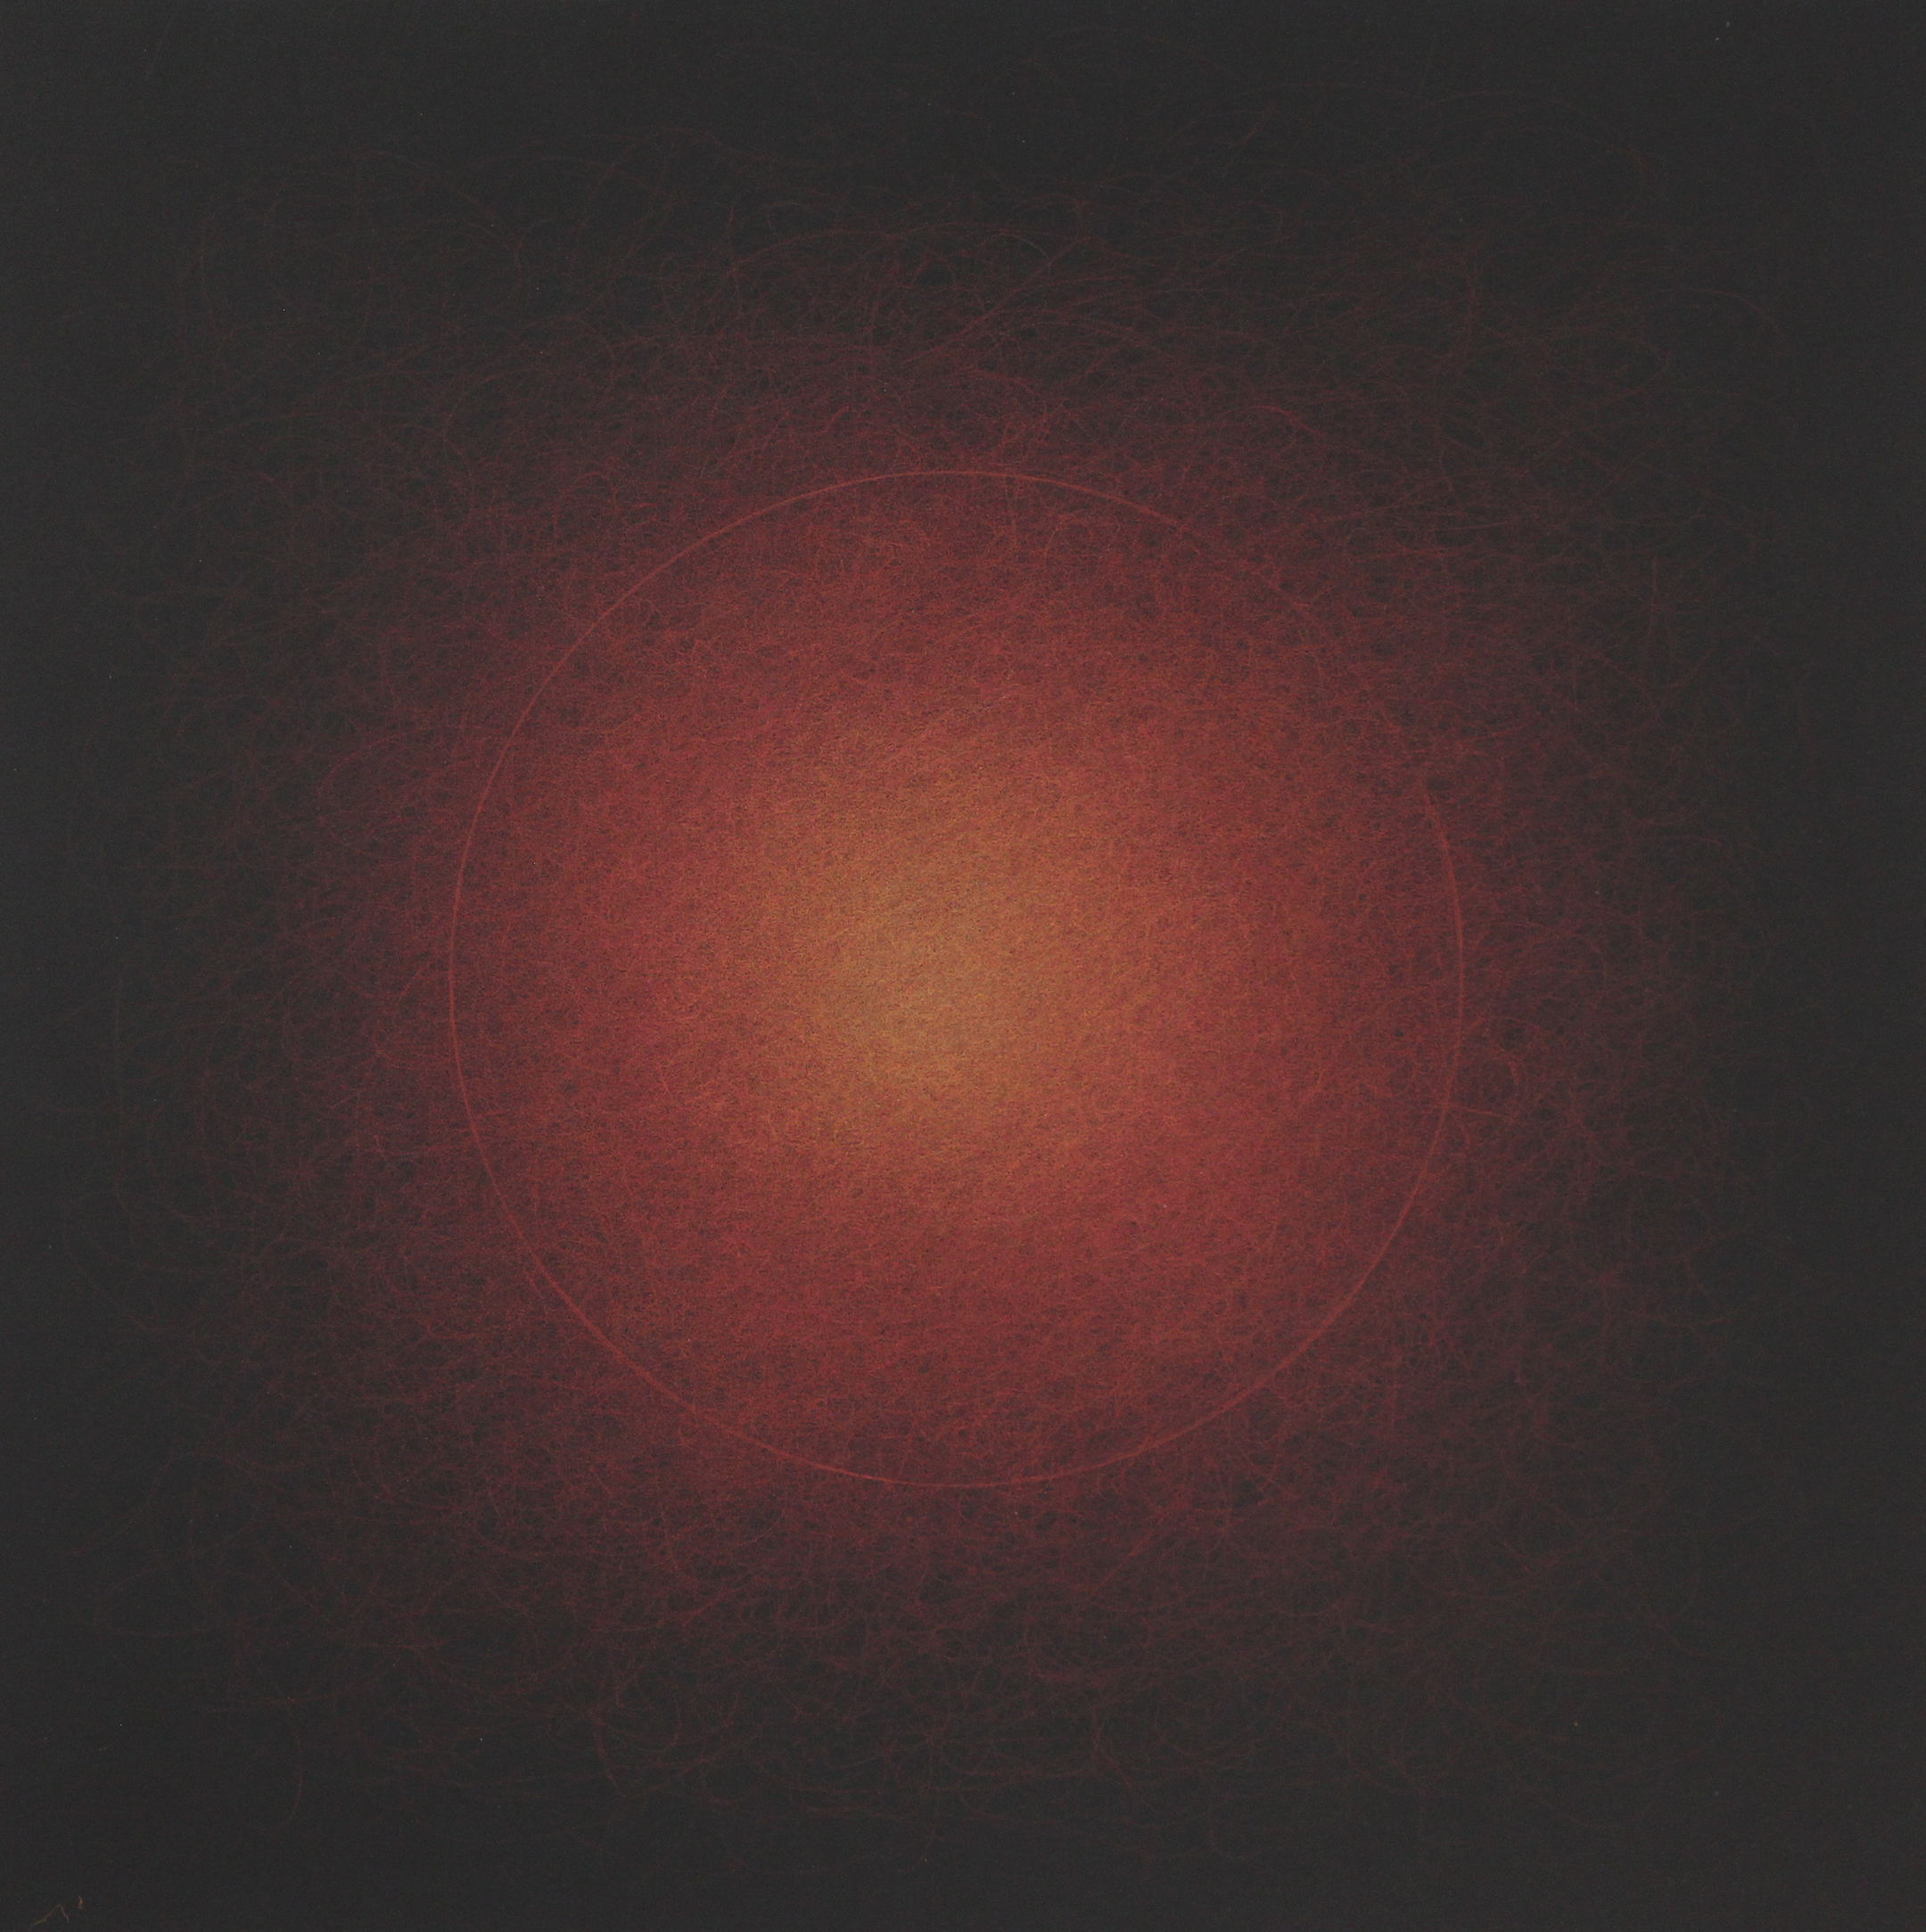 Quantum Entanglement (Red  Burst 1)
2021, colored pencil on museum board, 20 x 20"